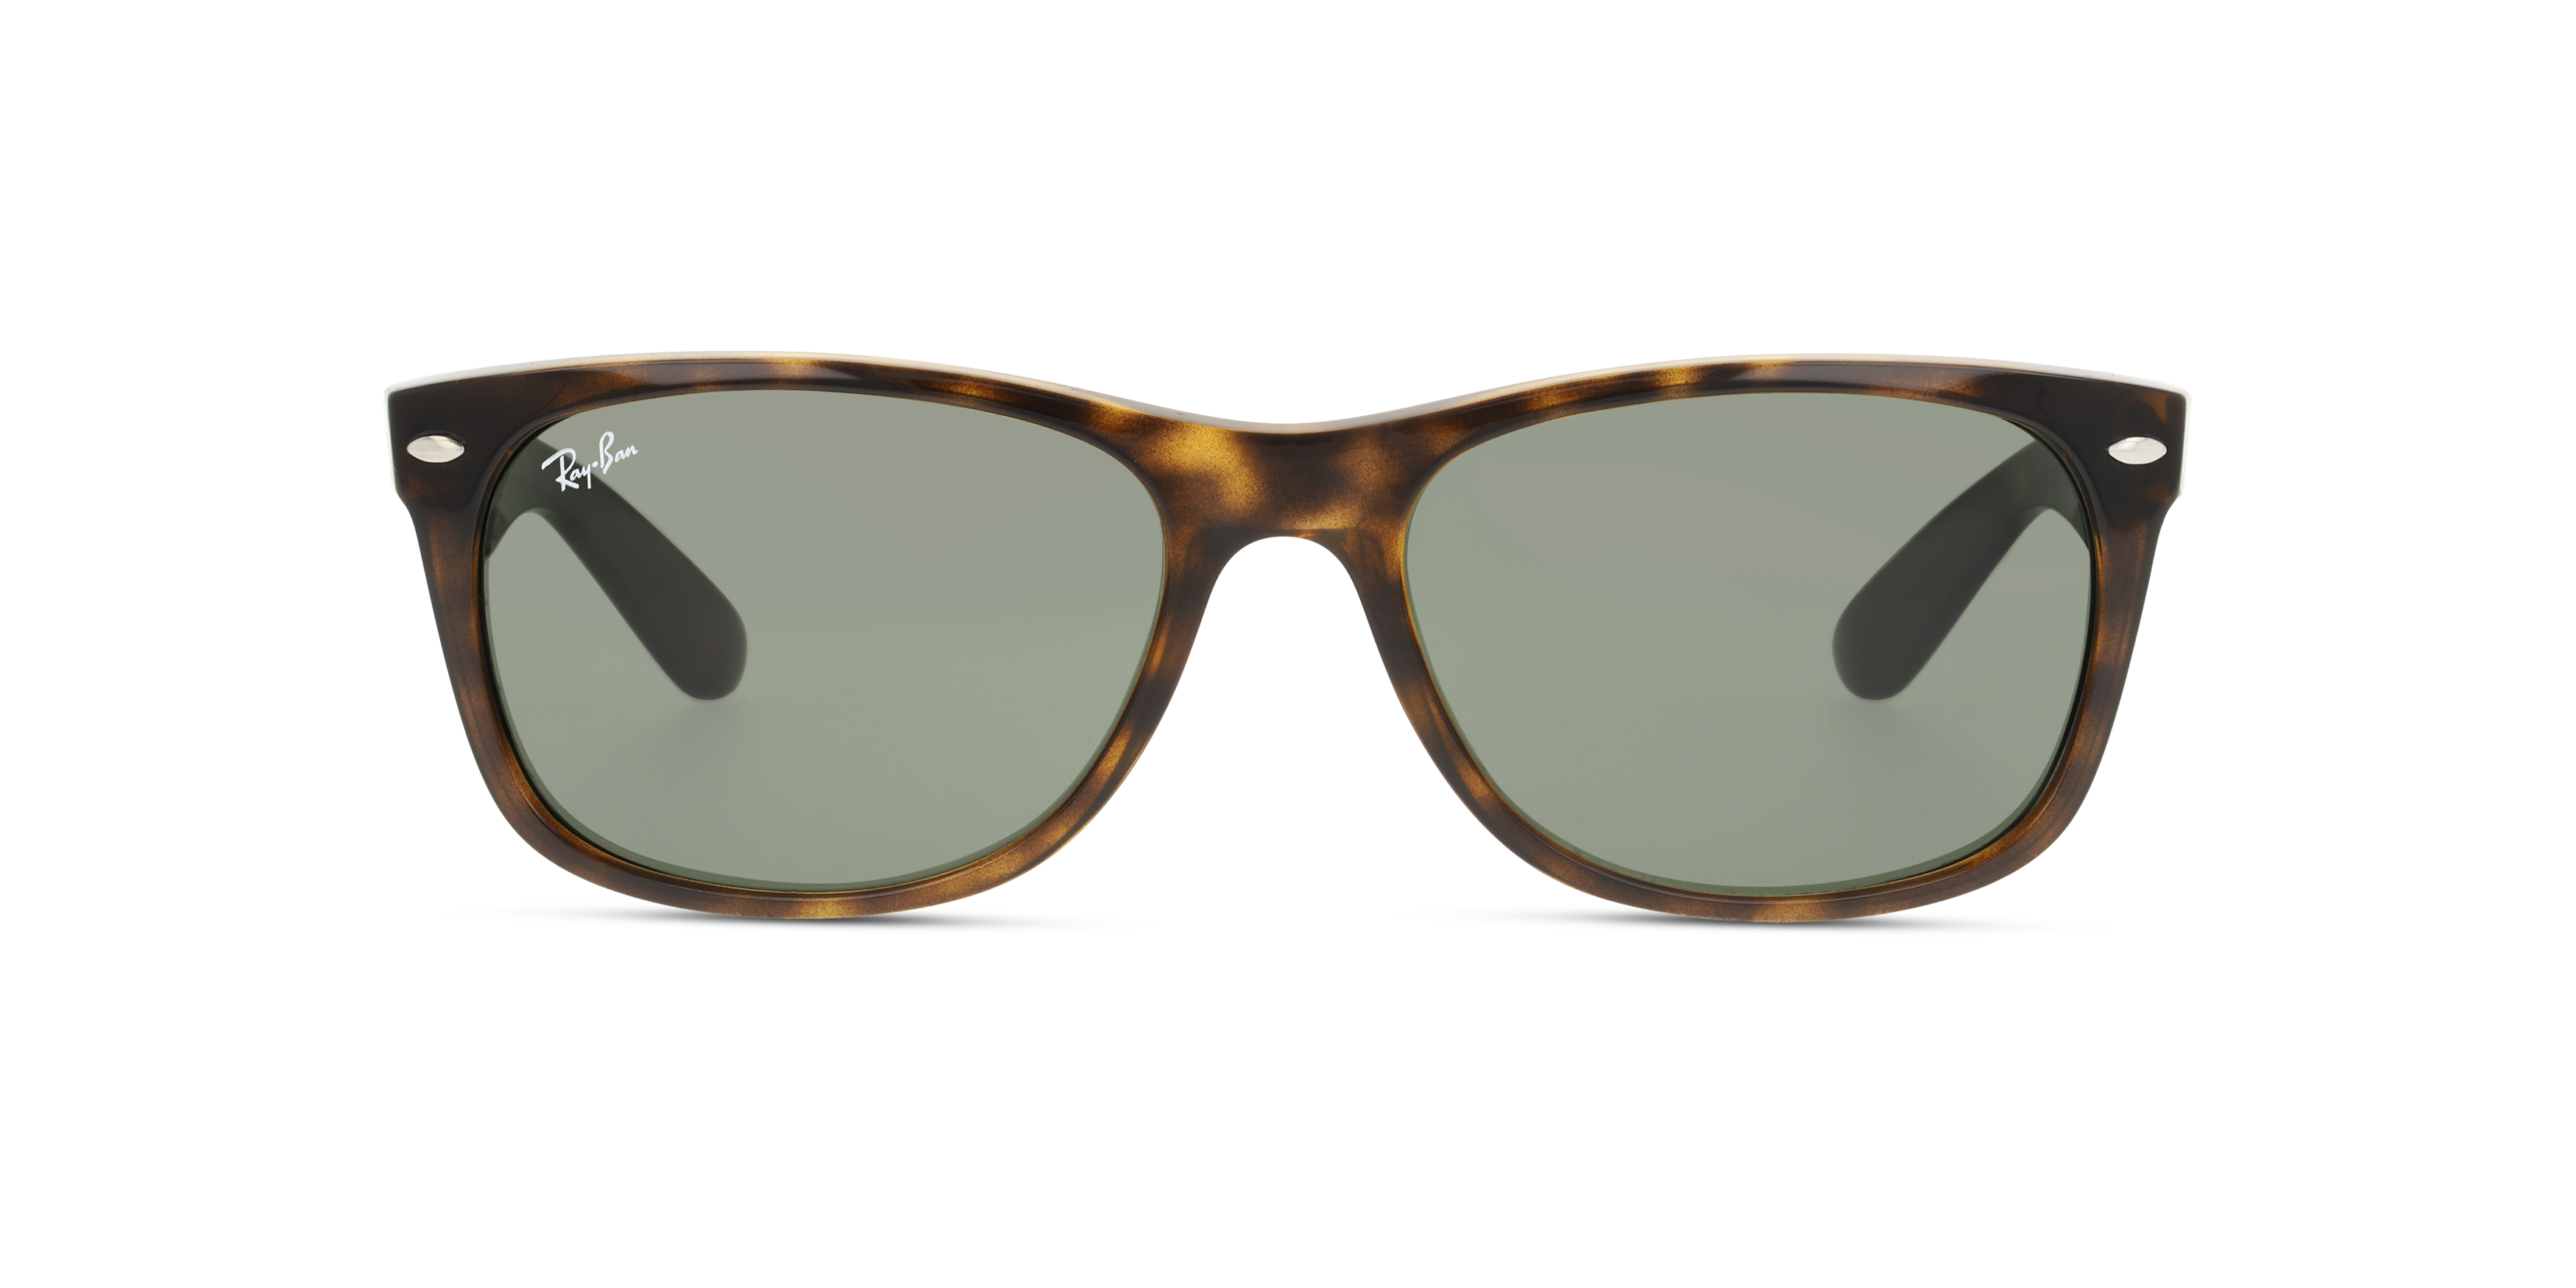 [products.image.front] RAY-BAN RB2132 902